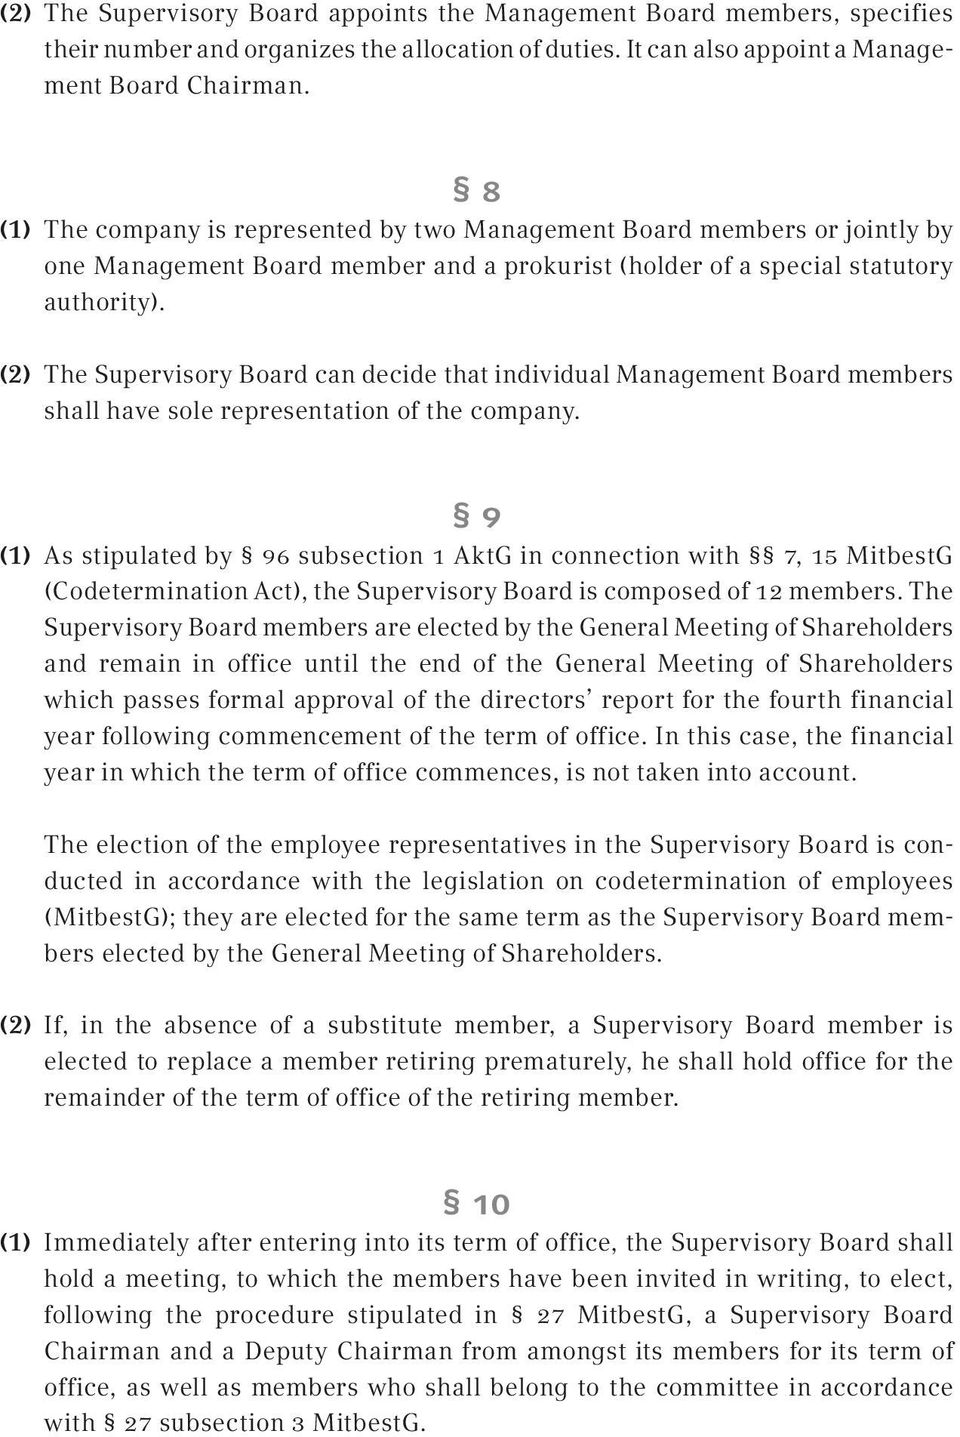 (2) The Supervisory Board can decide that individual Management Board members shall have sole representation of the company.